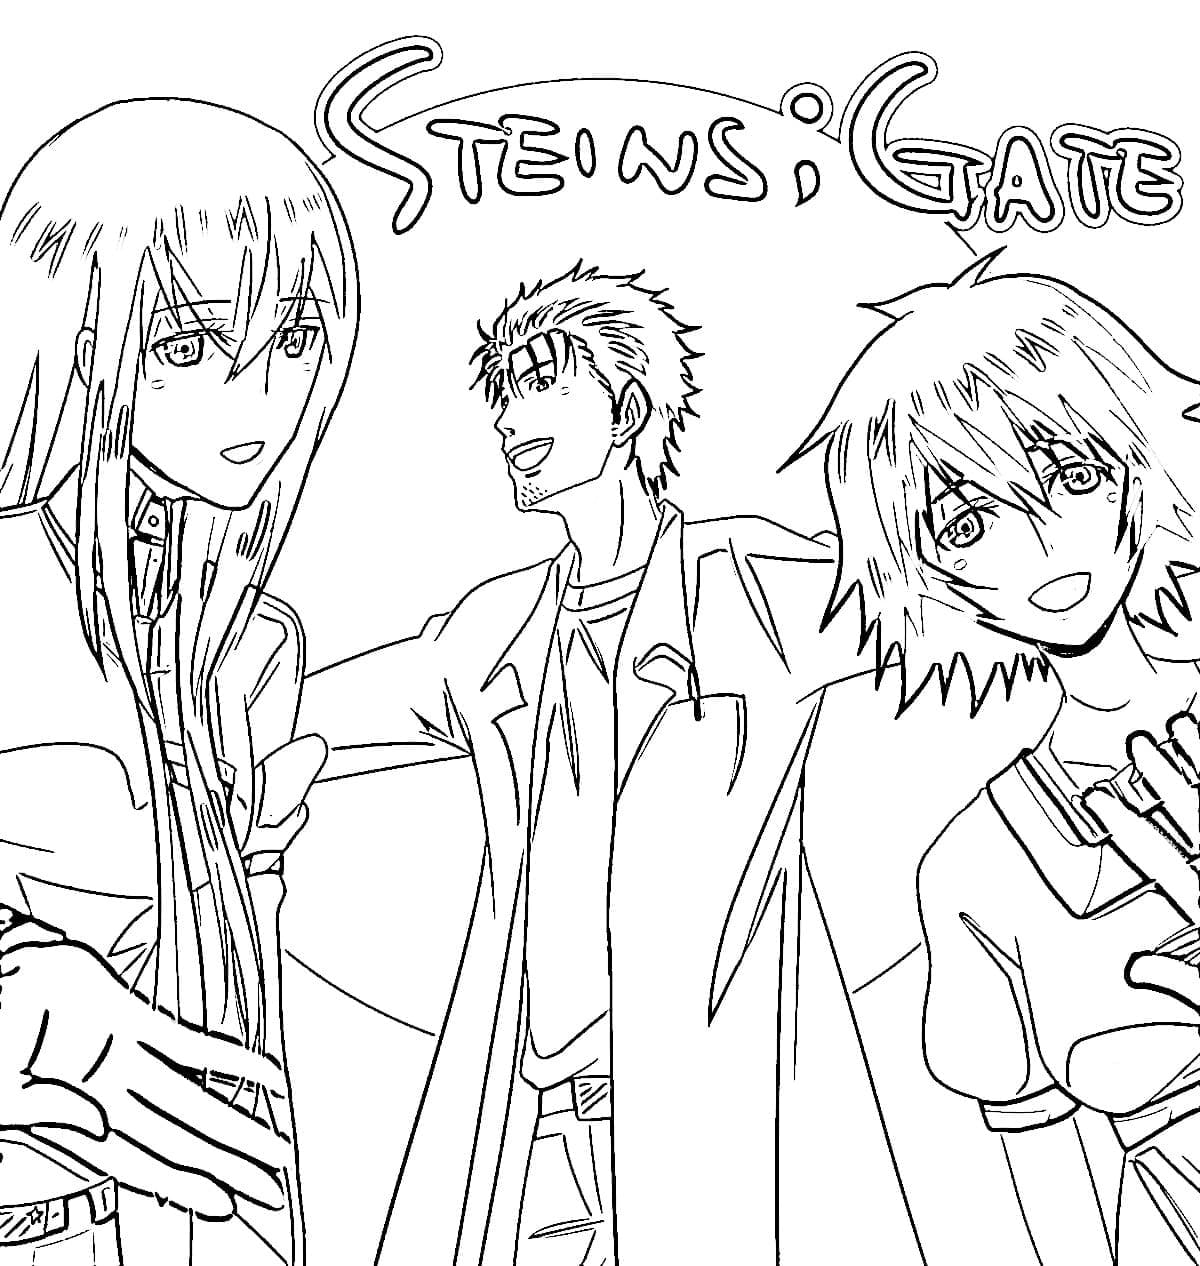 Characters from Steins Gate